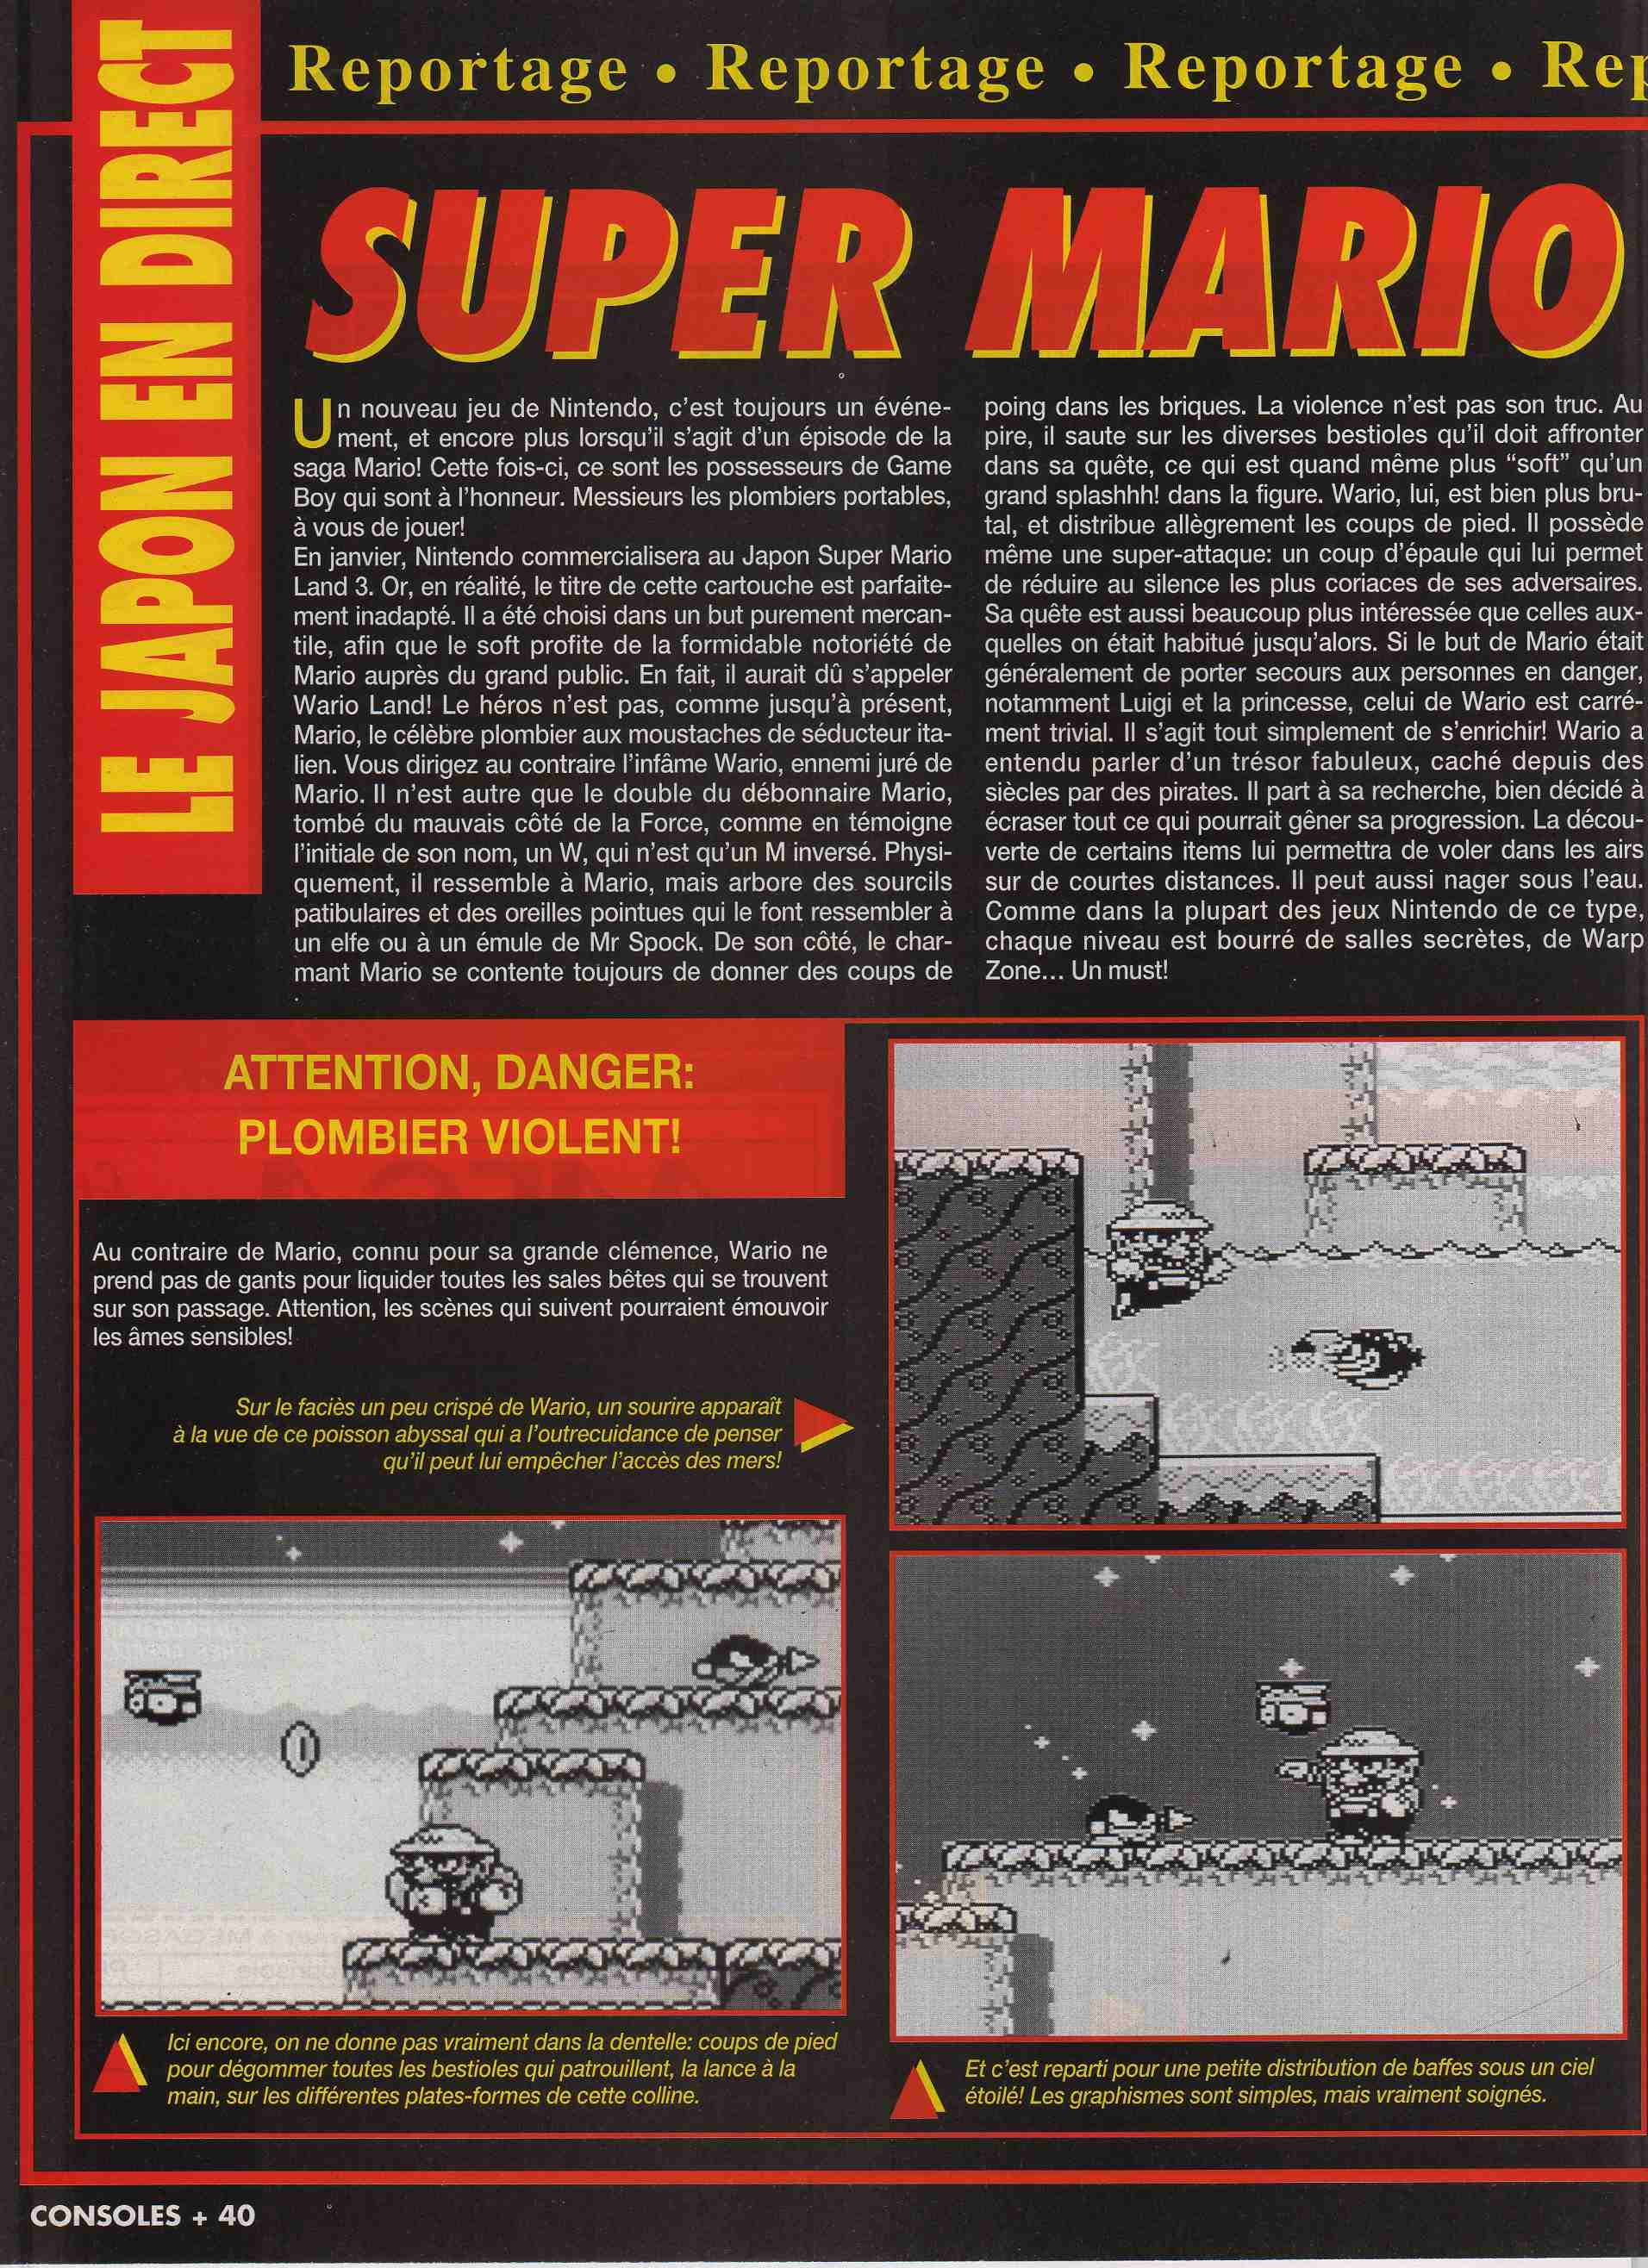 tests//51/CONSOLES+ 028 - Page 040 (1994-01).jpg